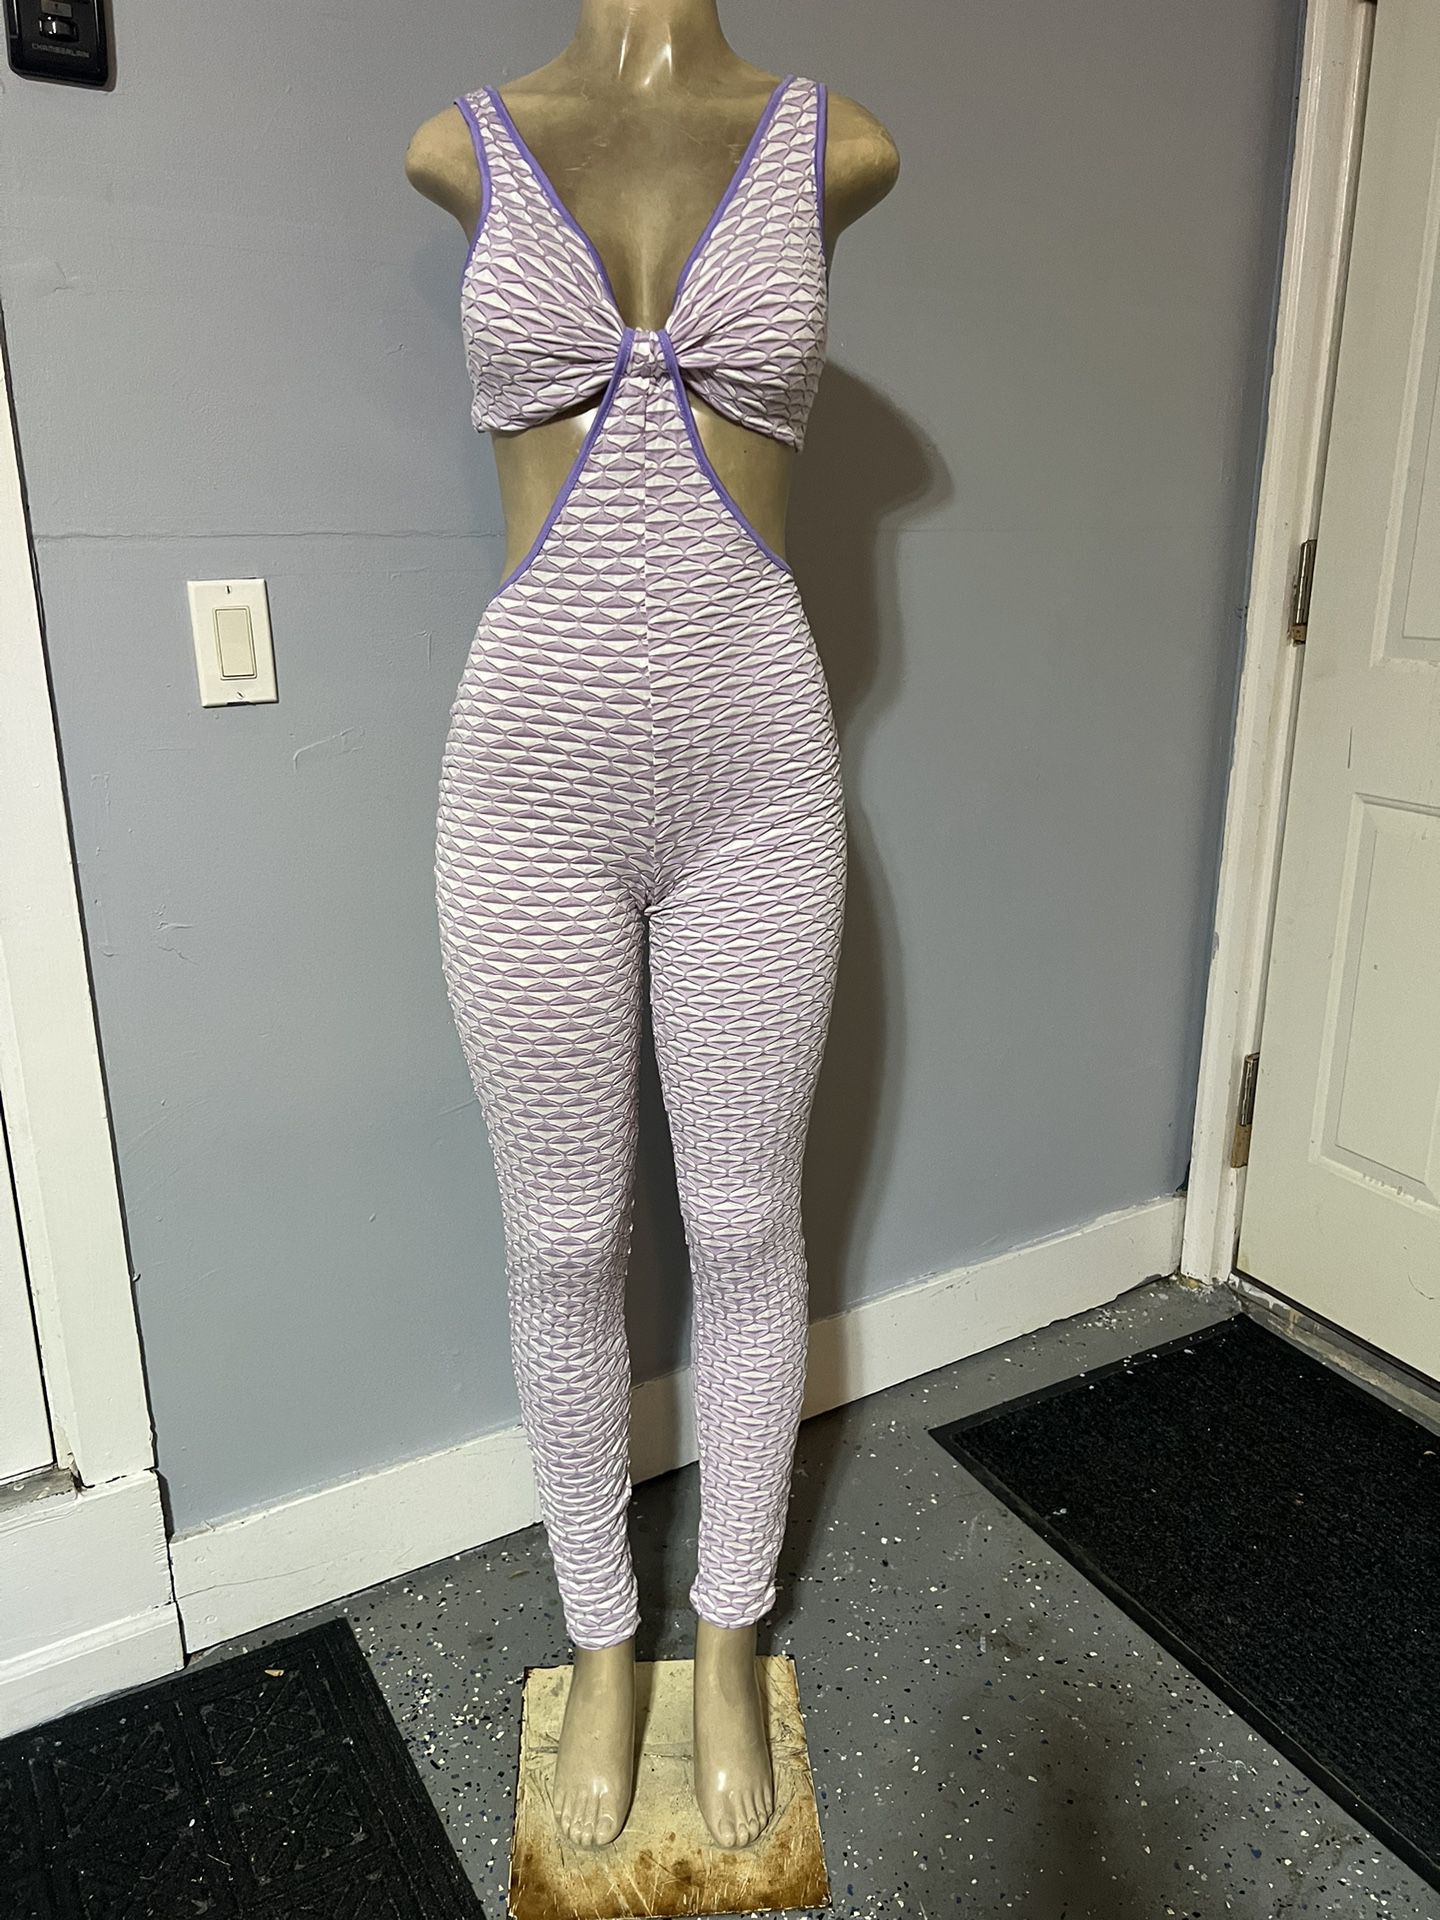 Streetwear Bodysuits New. 2 Colors Available. Small Medium And Large. $20 Each